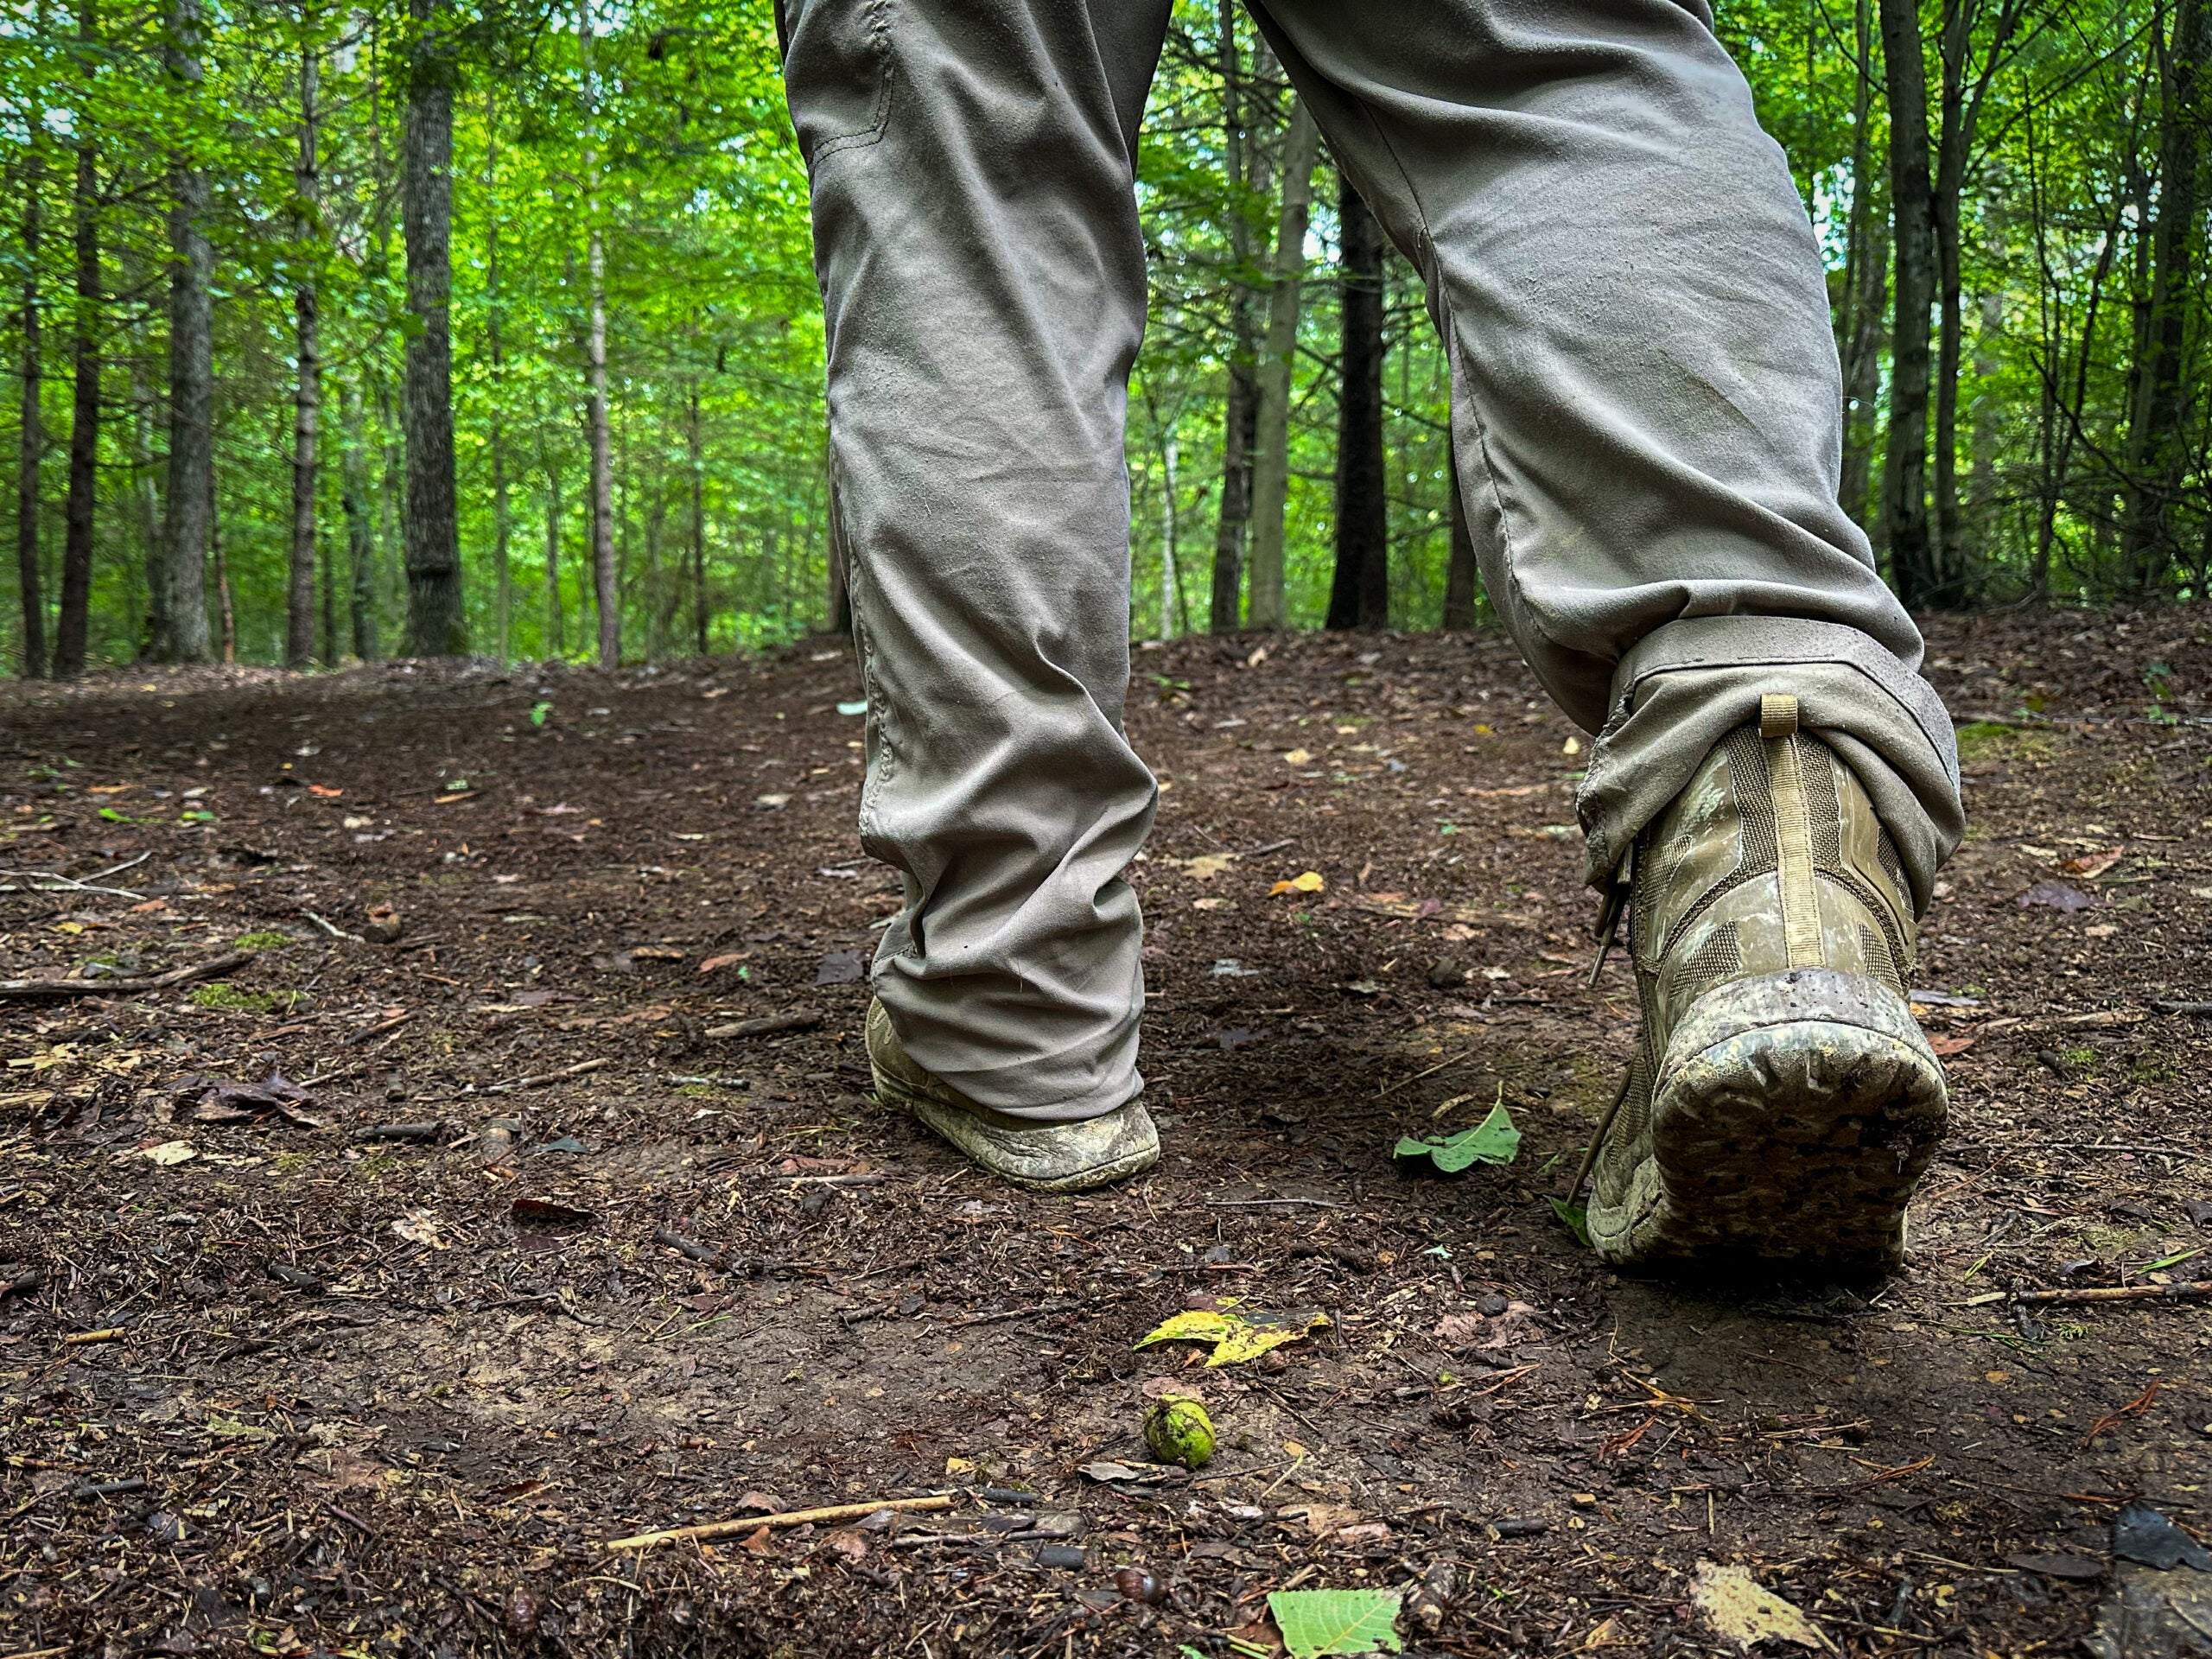 A hiker wearing hiking boots and gray pants walks along a firm dirt trail in woods with green trees.